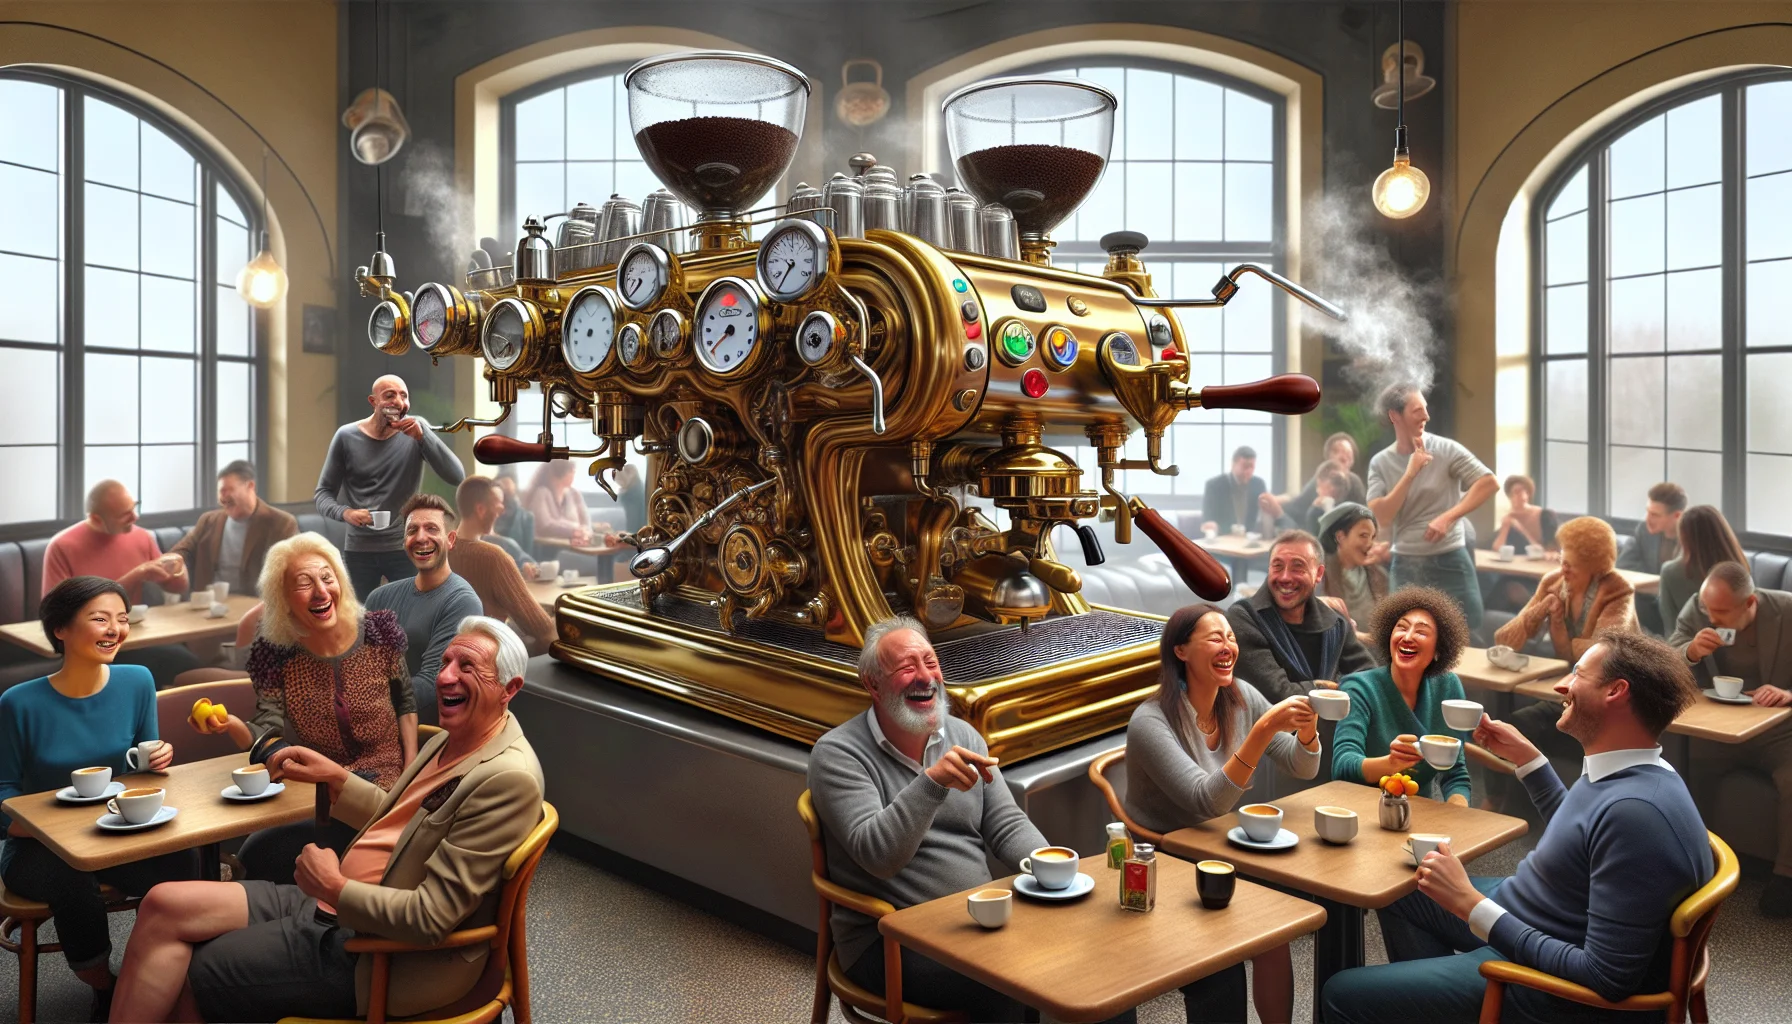 Imagine an unconventional and humorous scene in a busy cafe: an Italian-styled espresso machine assumes a playful personality. The intricate apparatus, featuring polished brass, bulbous glass tanks, and intricate gauges, is seen cheerfully 'dancing' with a cup of freshly brewed espresso in its levers, bubbling with fragrant steam. Various customers of all genders and descents, some midwestern American, Asian, African, Hispanic, and Middle Eastern, observe the spectacle with enchanted smiles, their attention captivated. The enticing aroma of fresh coffee fills the air, and the energy in the room conveys an irresistible invitation to join in the coffee-enjoyment.